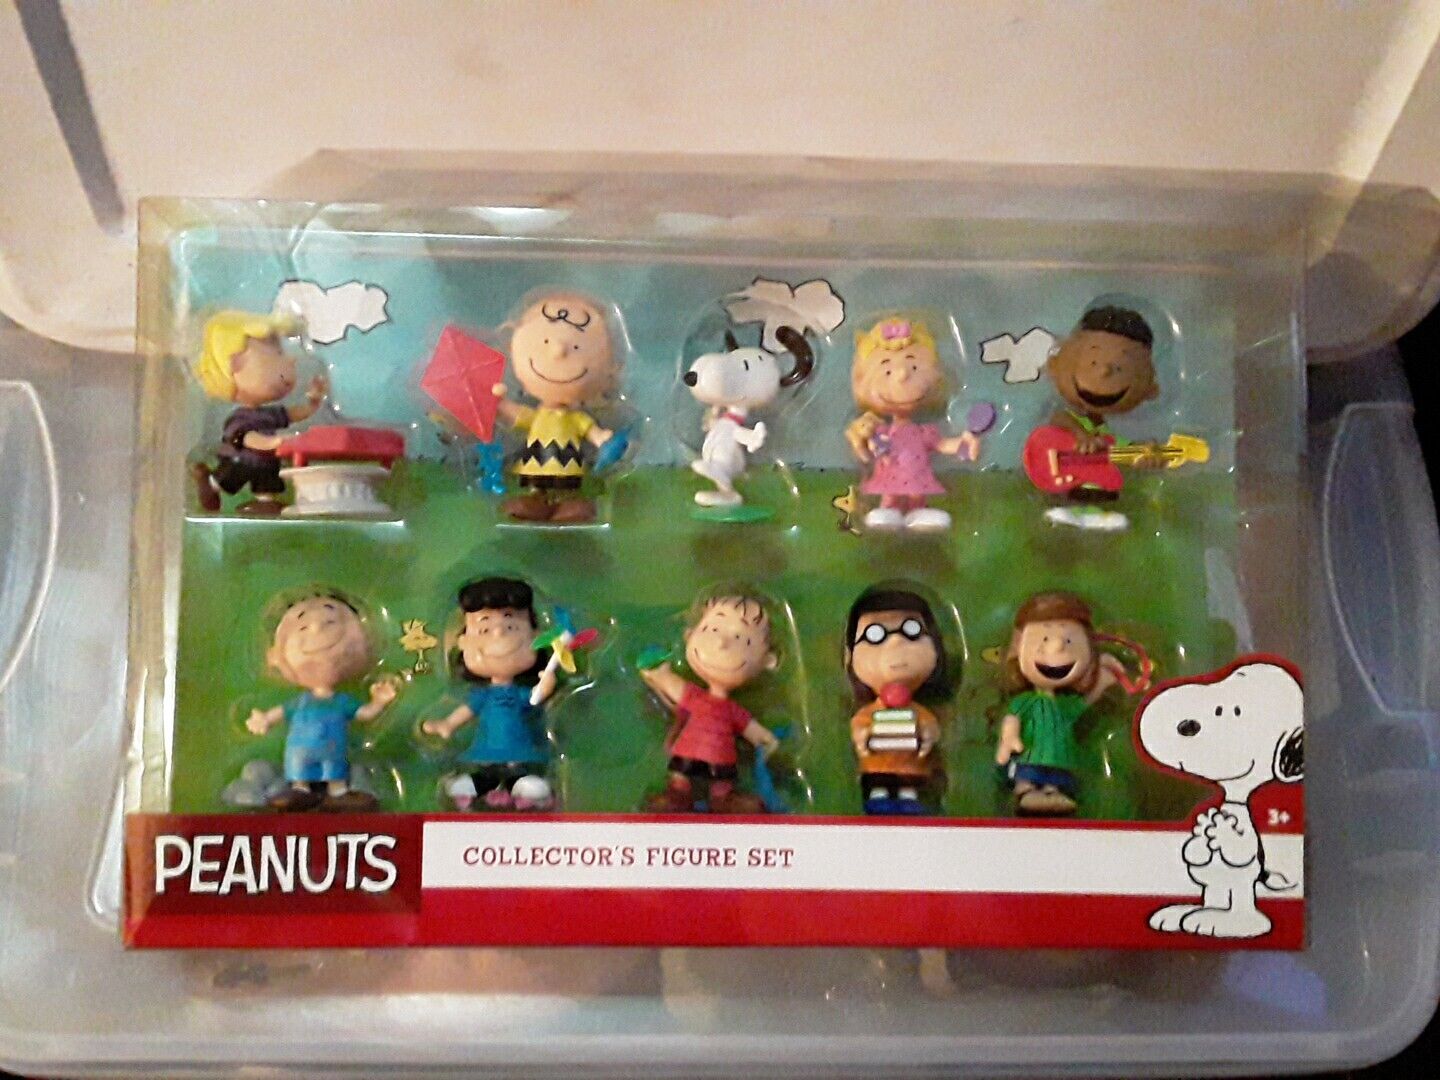 Peanuts Collector Set 10 Figures Just Play Snoopy Charlie Brown Linus Lucy Set